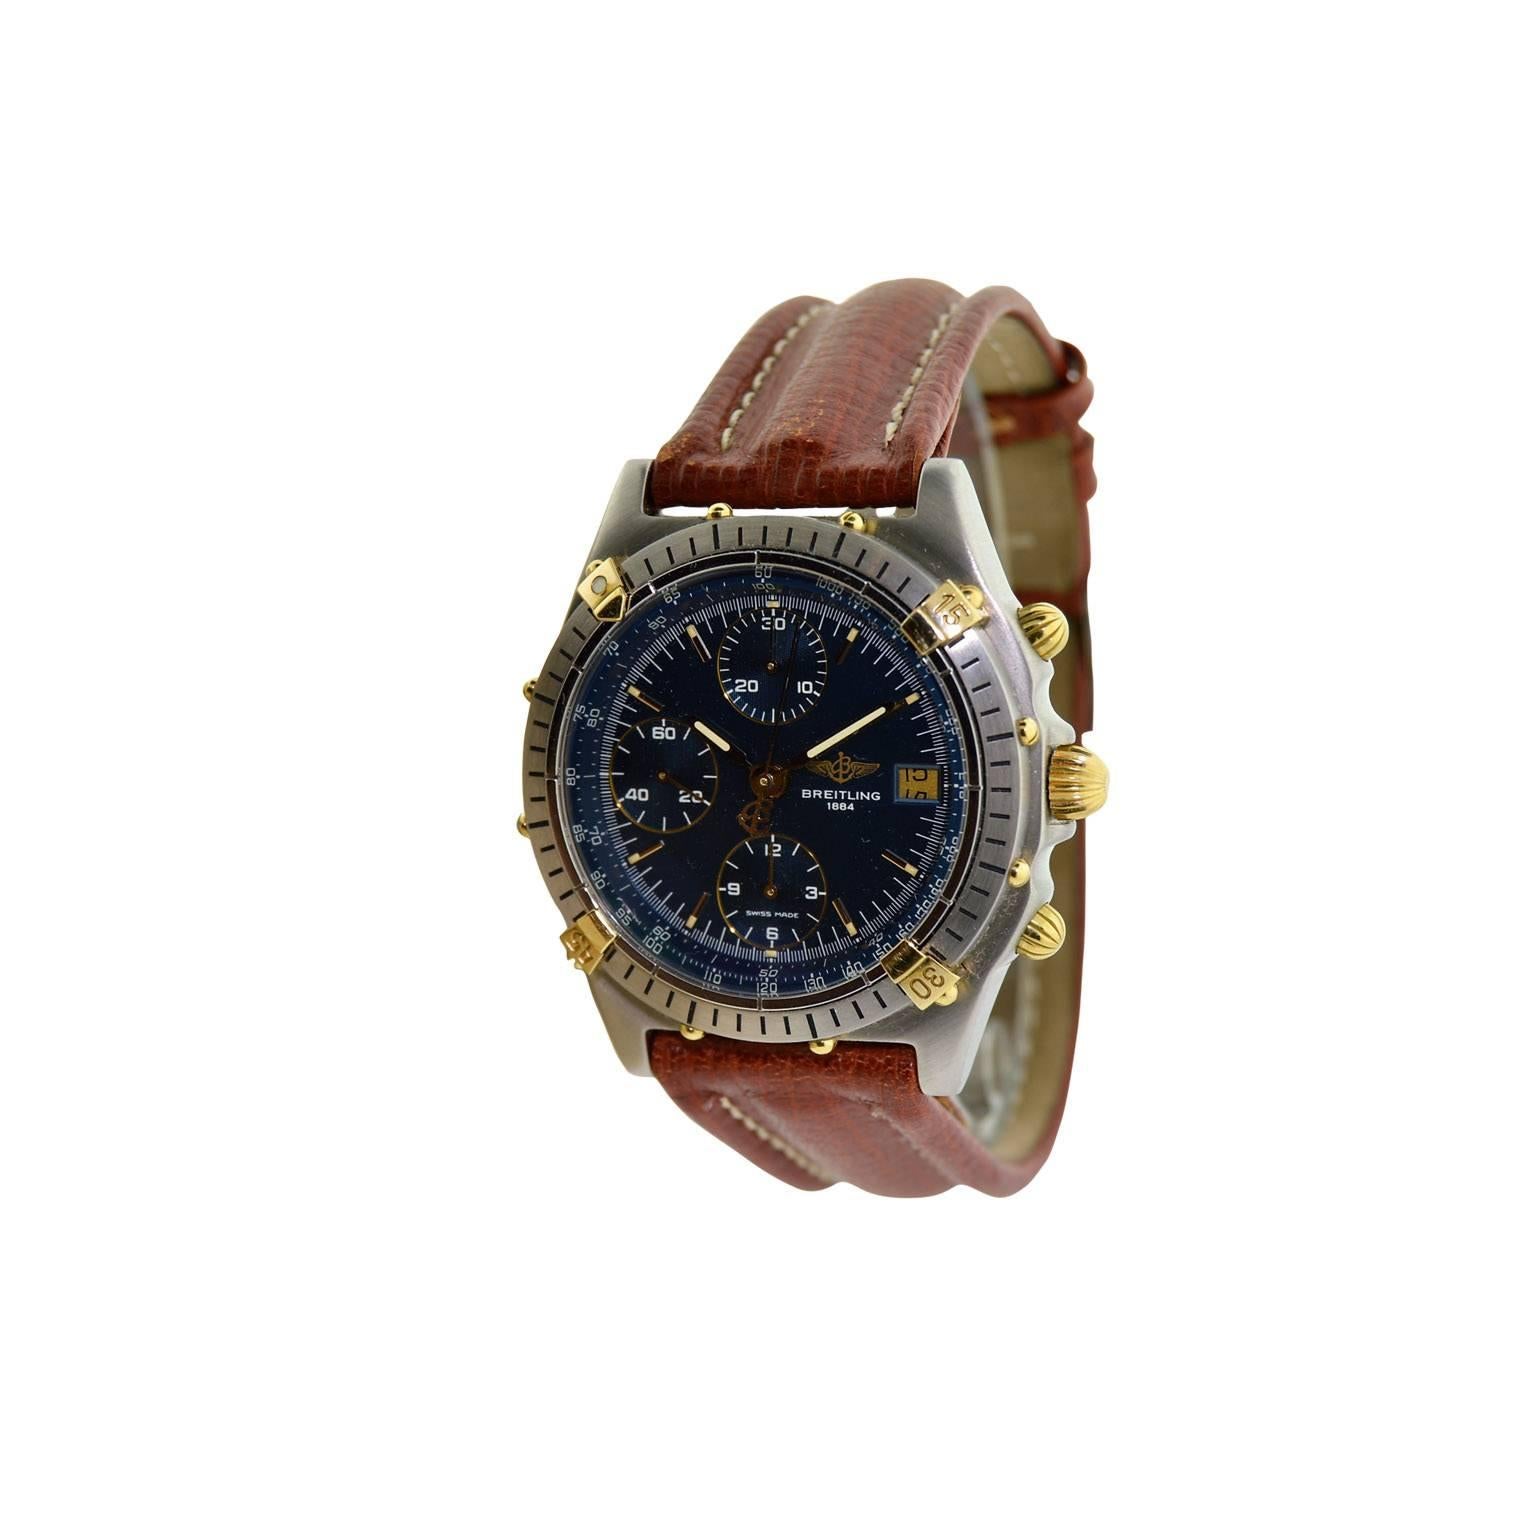 FACTORY / HOUSE: Breitling Watch Company
STYLE / REFERENCE:  Chronomat / 81.950
METAL / MATERIAL: 18Kt. Gold and Steel
CIRCA: 1990's
DIMENSIONS: 39mm X 39mm
MOVEMENT / CALIBER: Automatic Winding / 25 Jewels 
DIAL / HANDS: Original Blue / Steel Baton